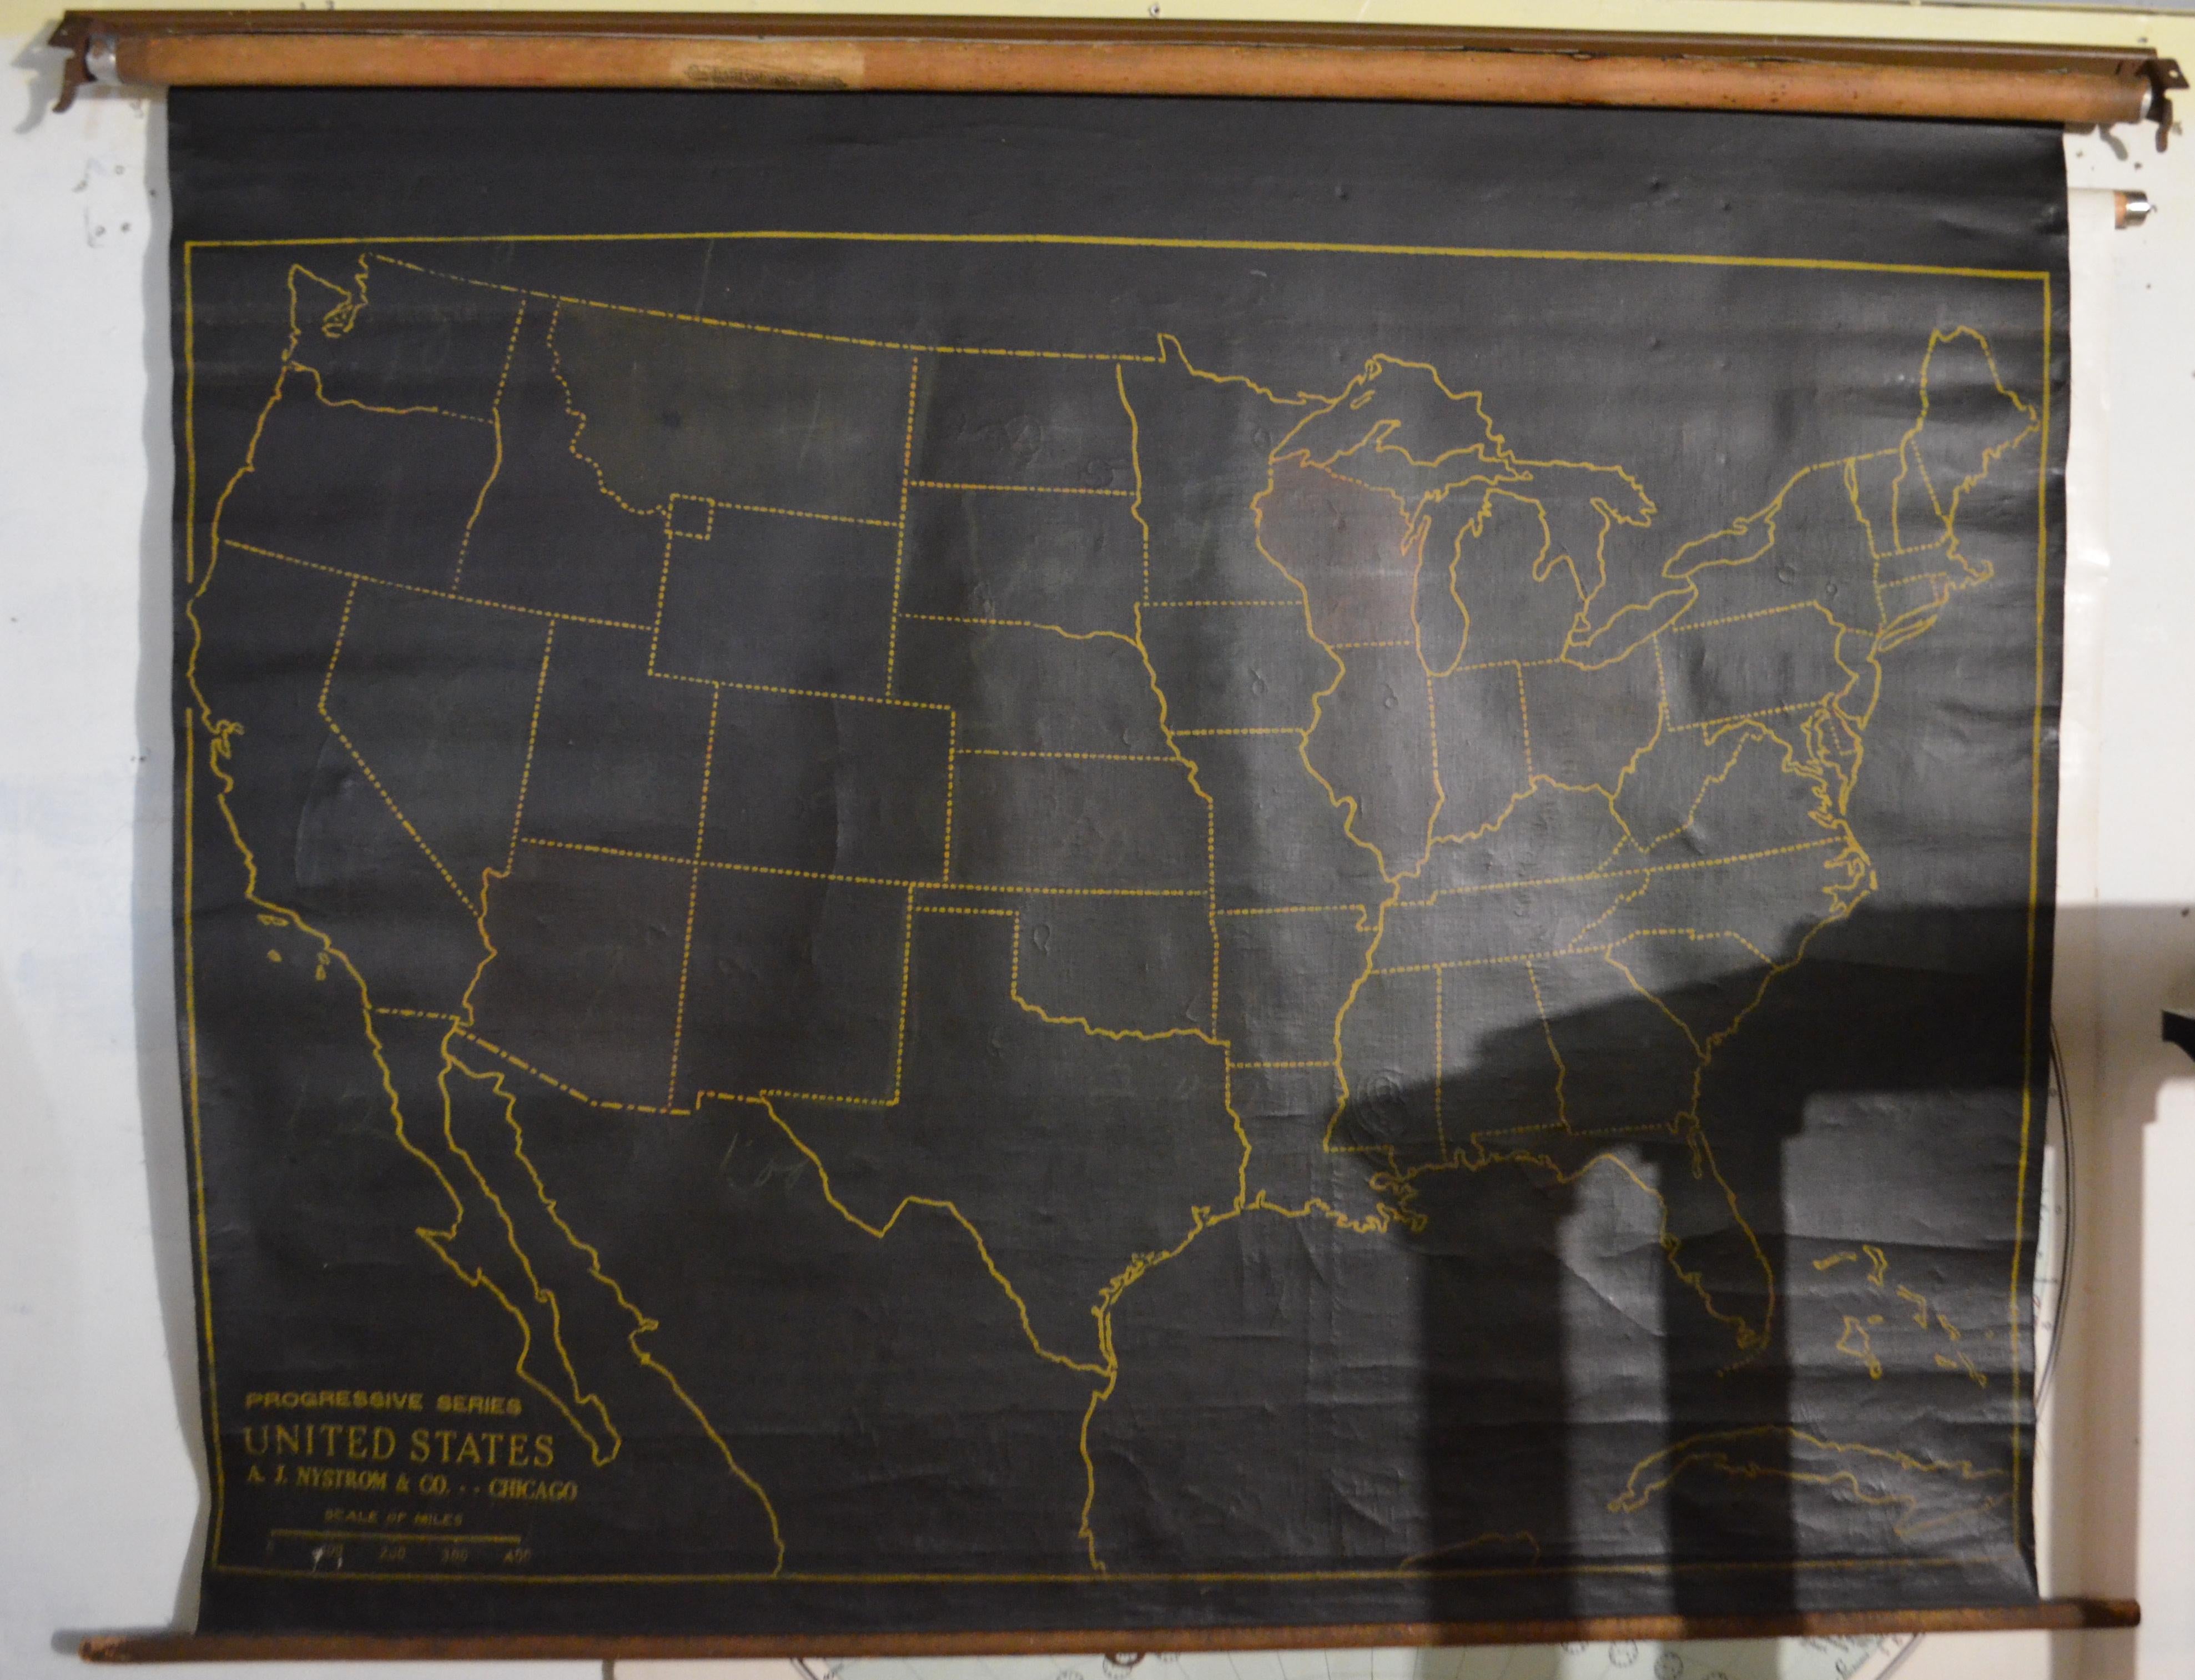 Map of the United States, early 1900s. Unique classroom application with its durable black chalkboard canvas that allows for hand-written annotations that are easily erasable. Whether used for instructional purposes or for striking wall display,